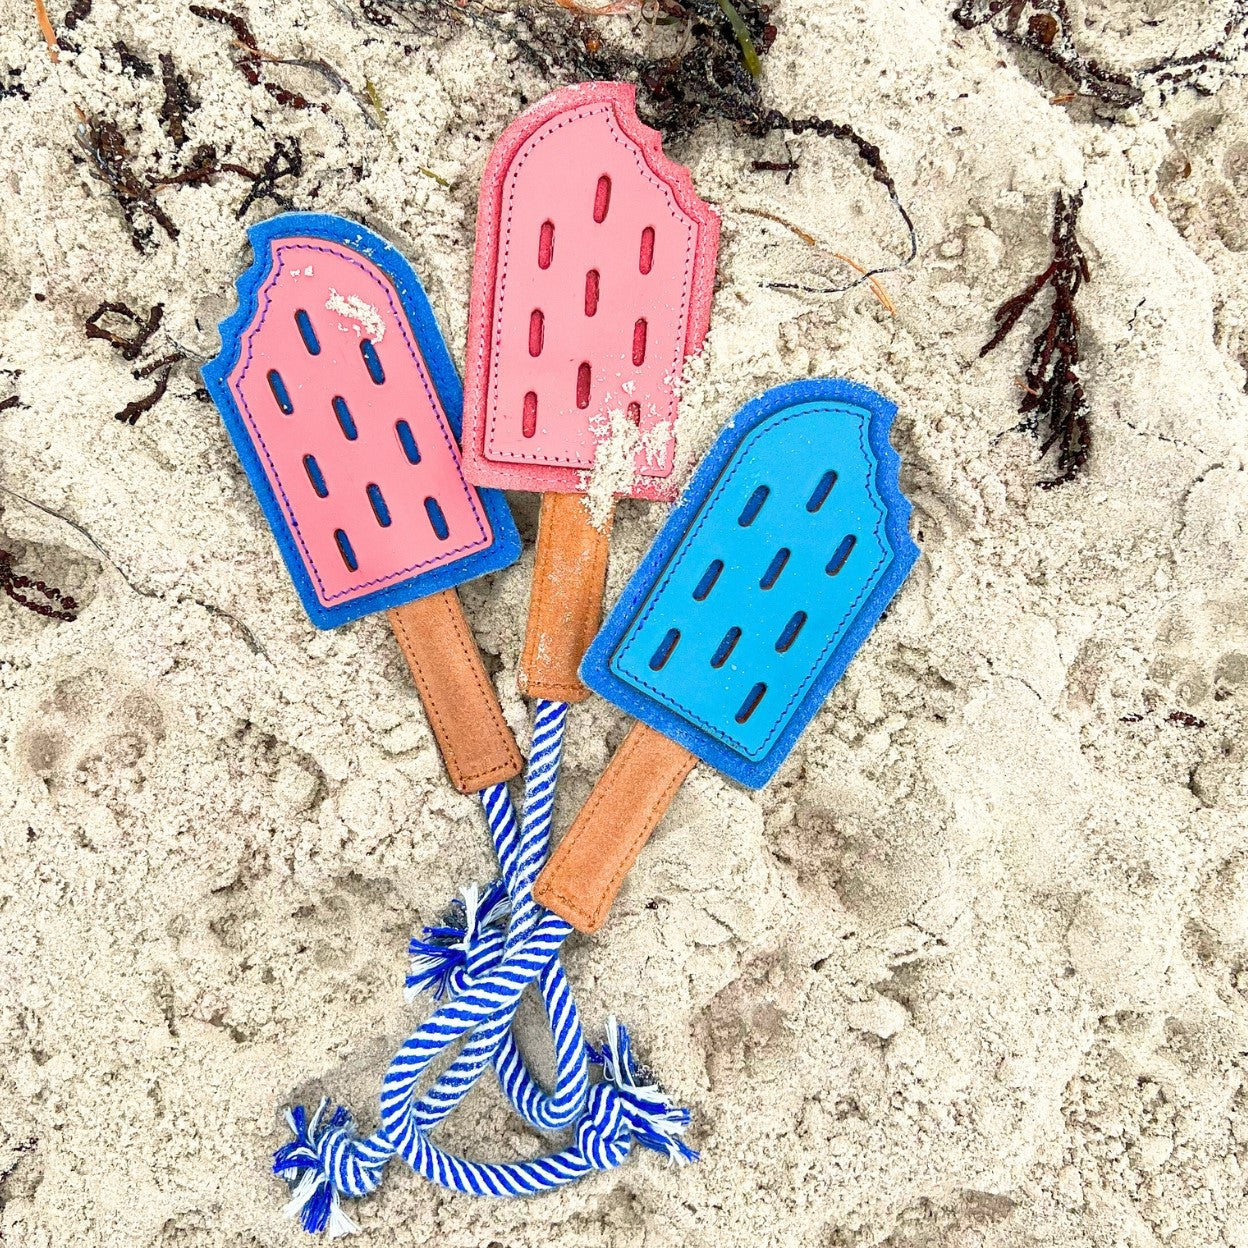 Three colorful Georgie Paws Icy Pole-shaped decorative objects with navy tops and brown buffalo leather handles are arranged on a sandy surface, tied together with a striped blue and white ribbon.